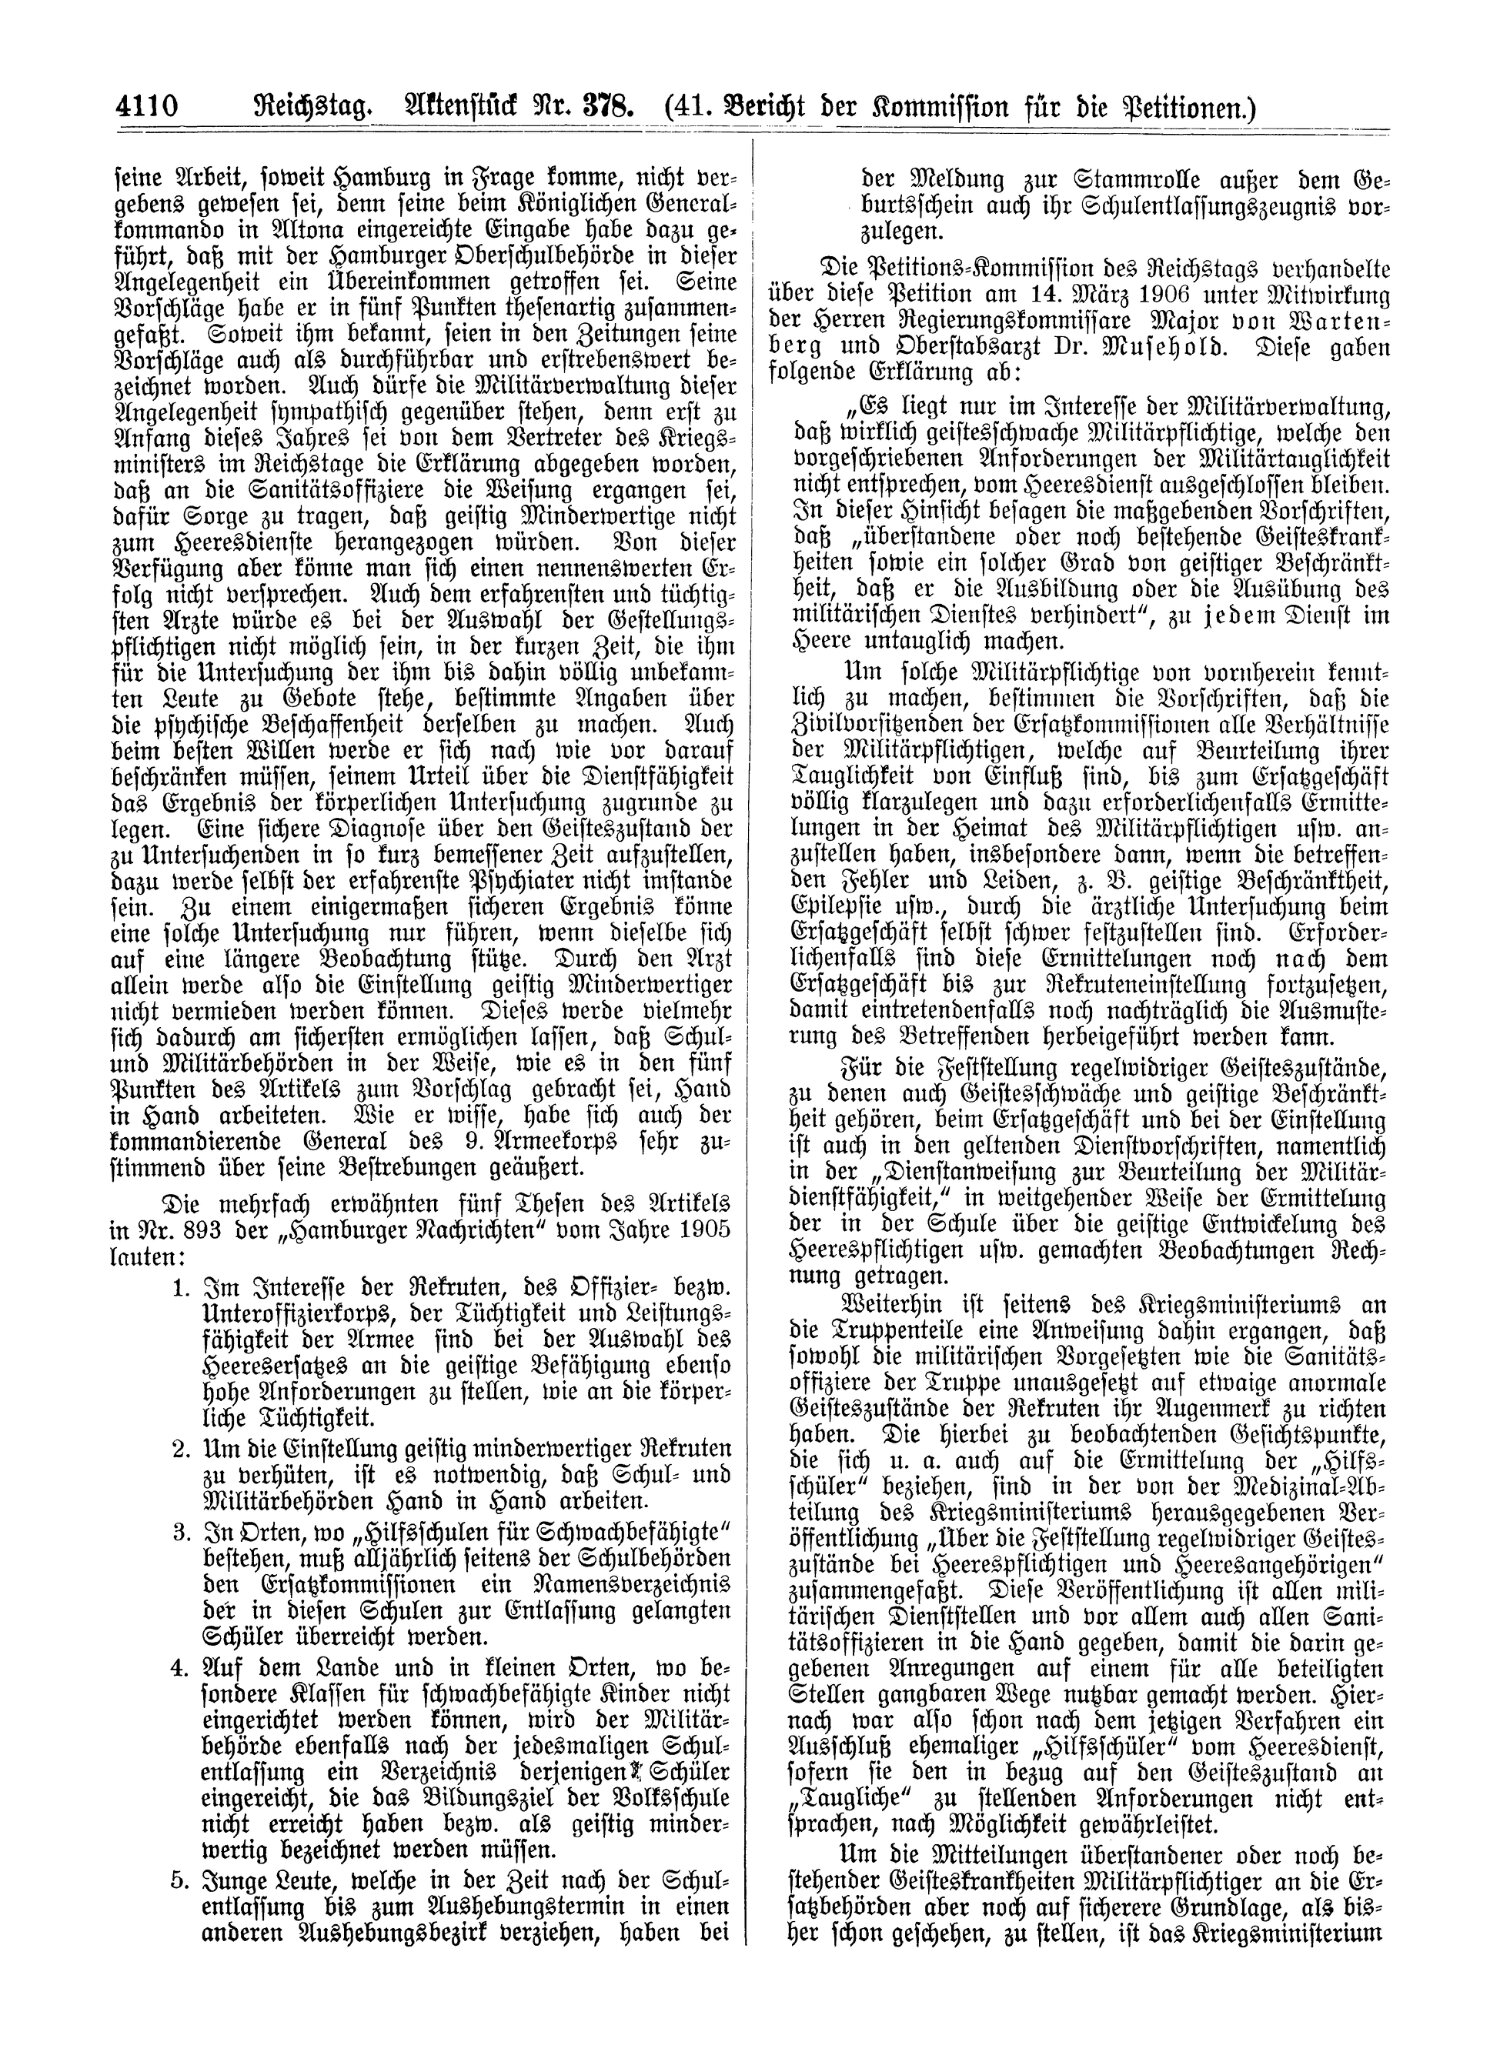 Scan of page 4110